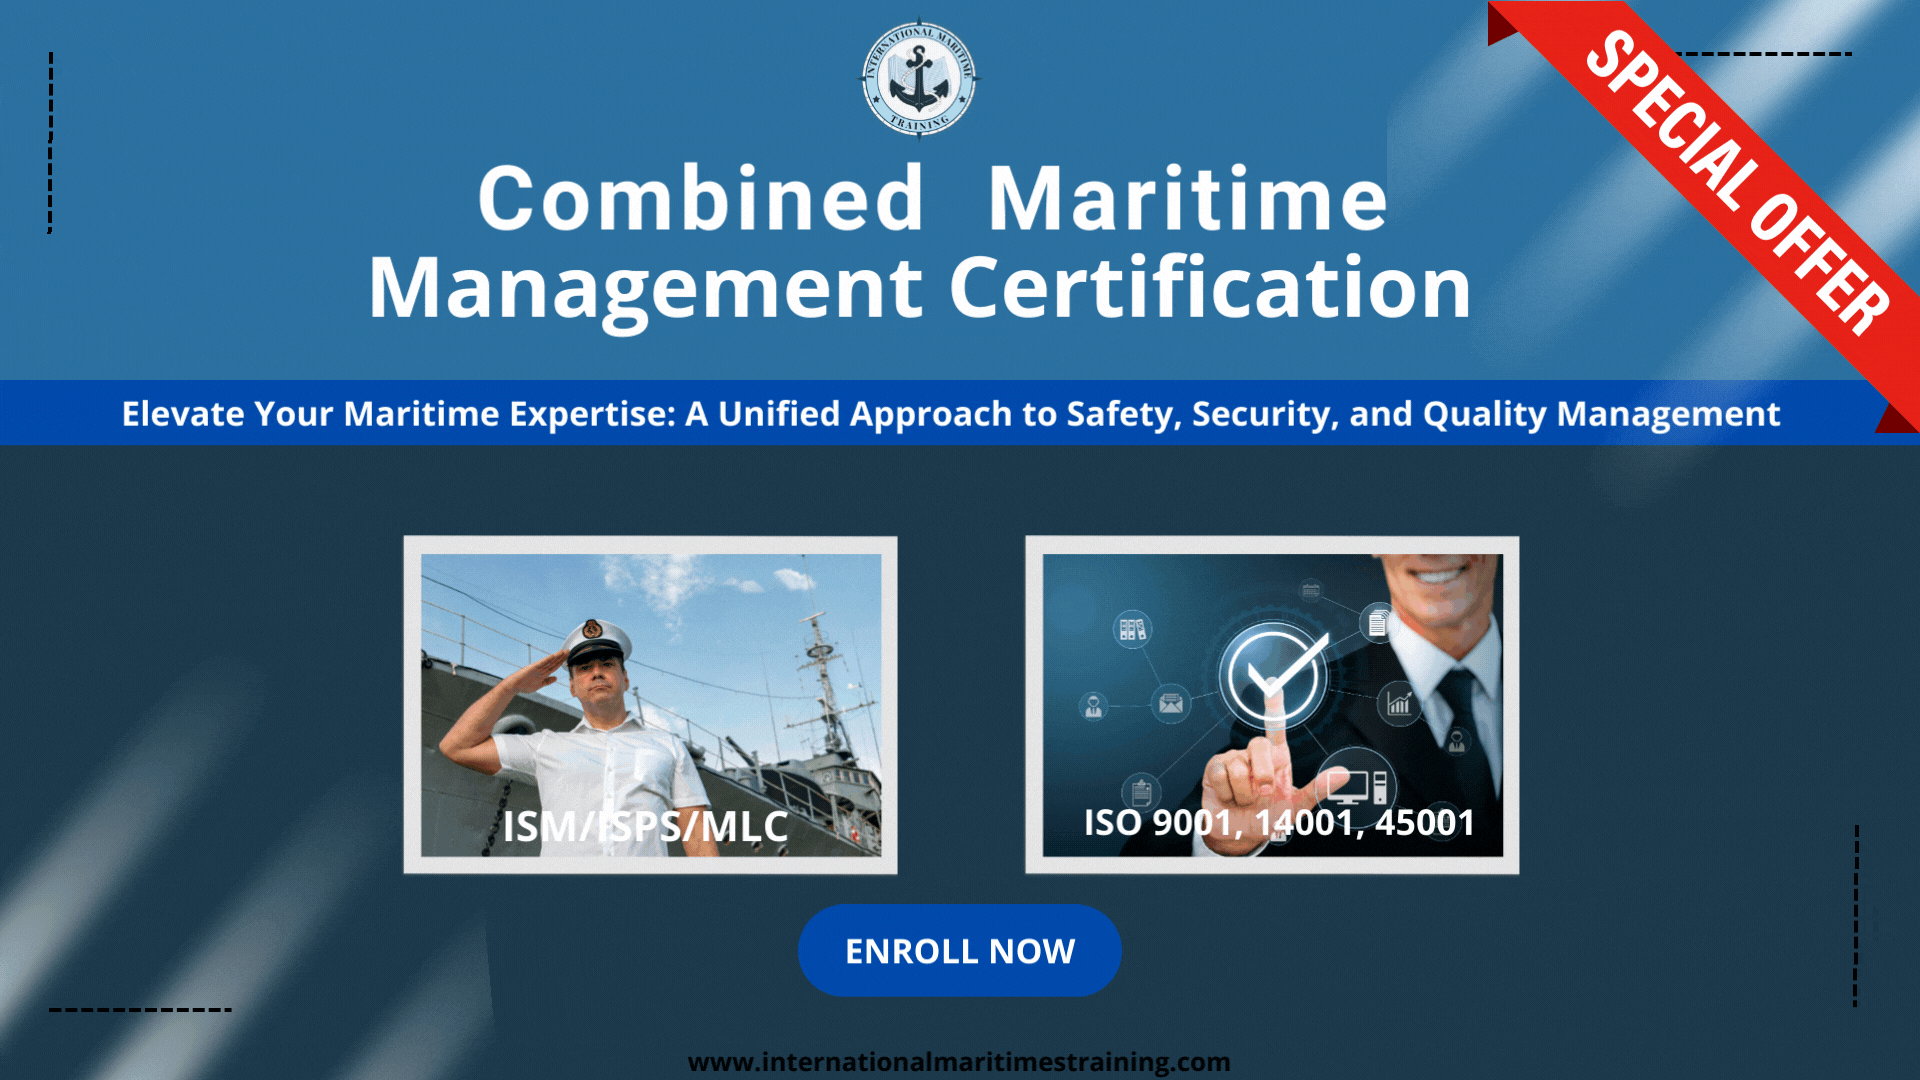 Combined Certificate  ISM,ISPS,MLC Maritime Auditor & ISO (International Organization for Standardization) standards (ISO 9001, ISO 14001, ISO 45001)